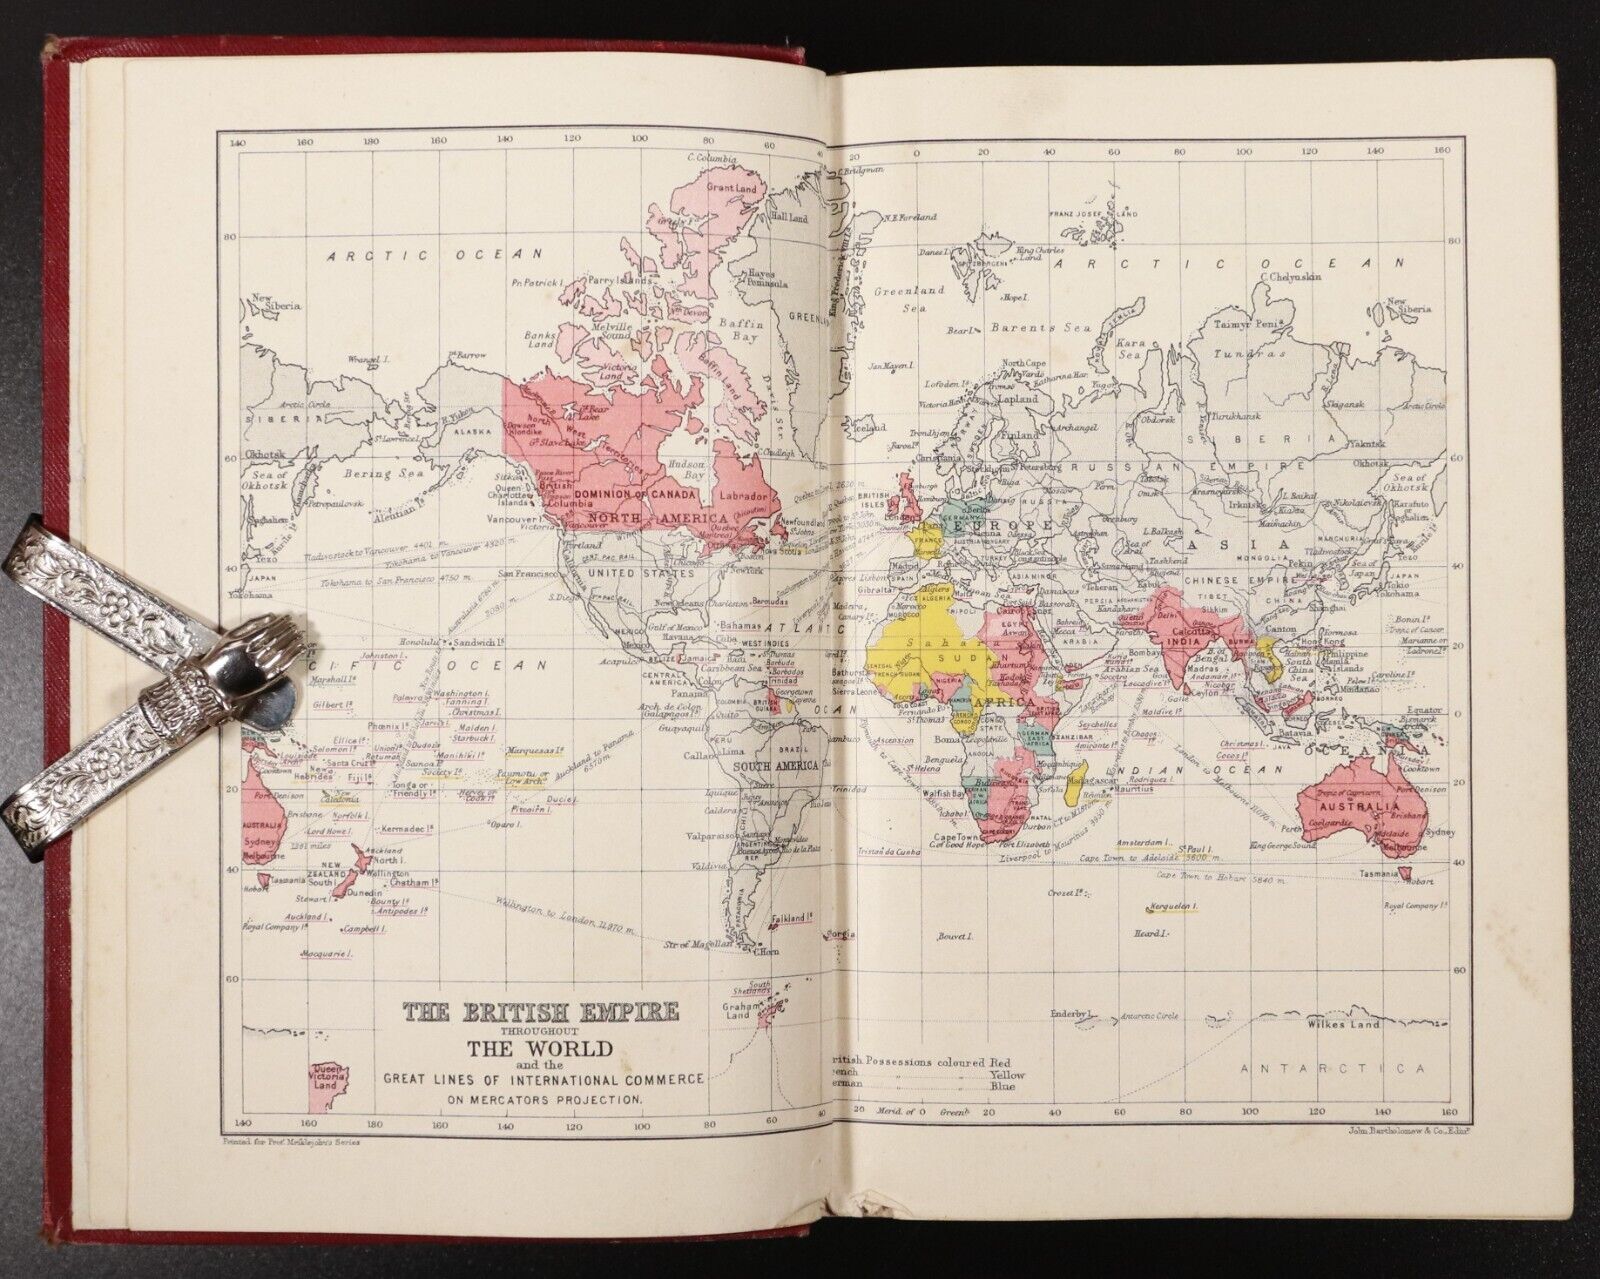 1909 A New Geography by JMD Meiklejohn Antique World Reference Maps Book - 0